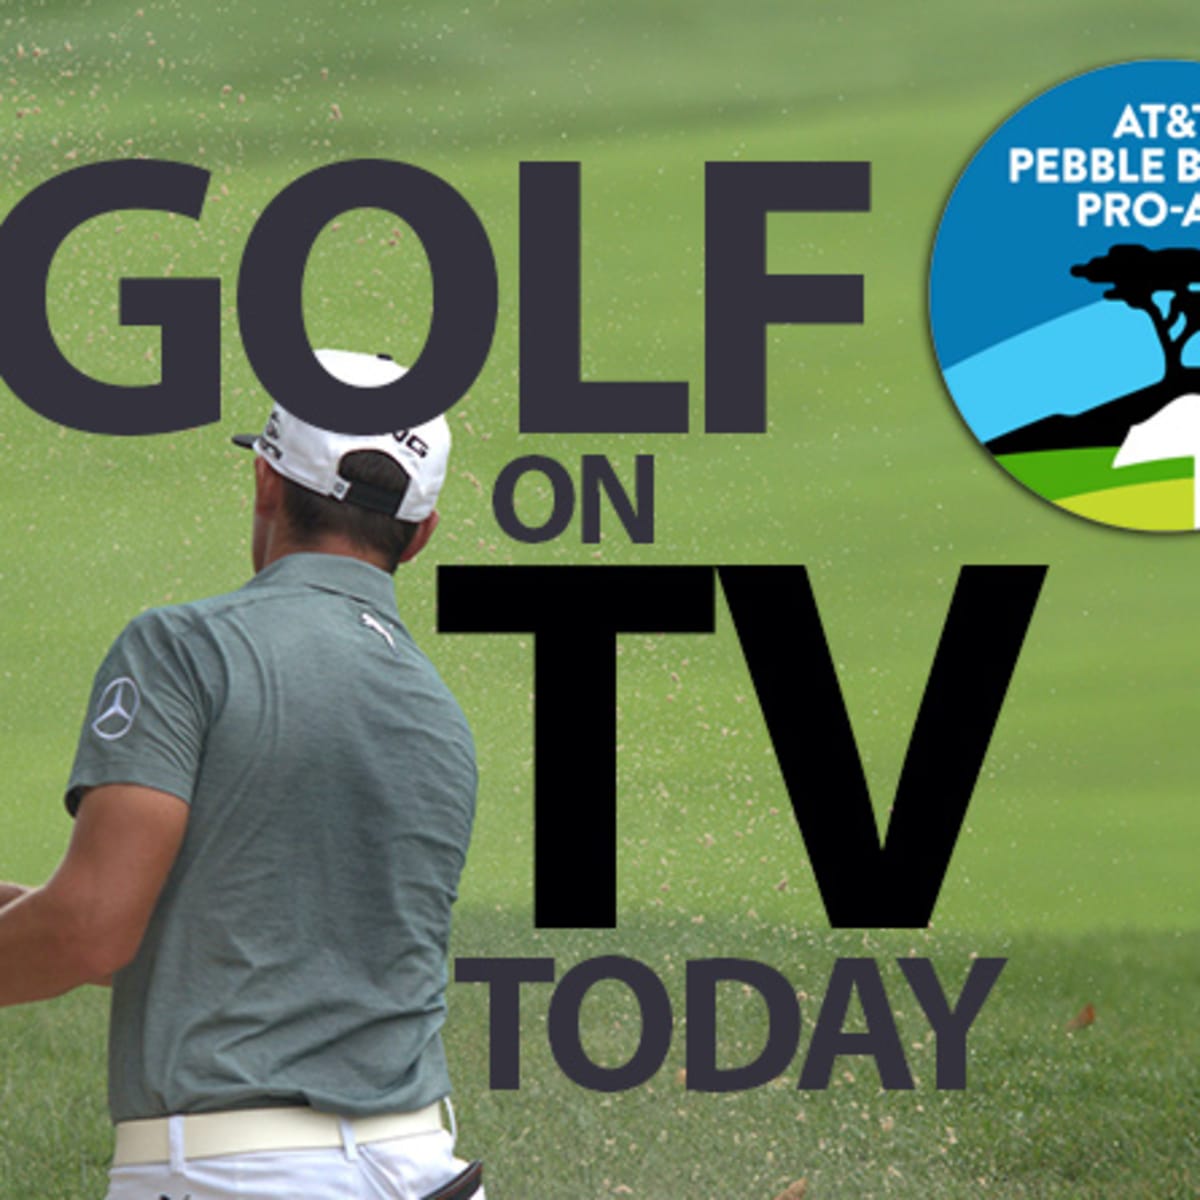 live golf on tv today